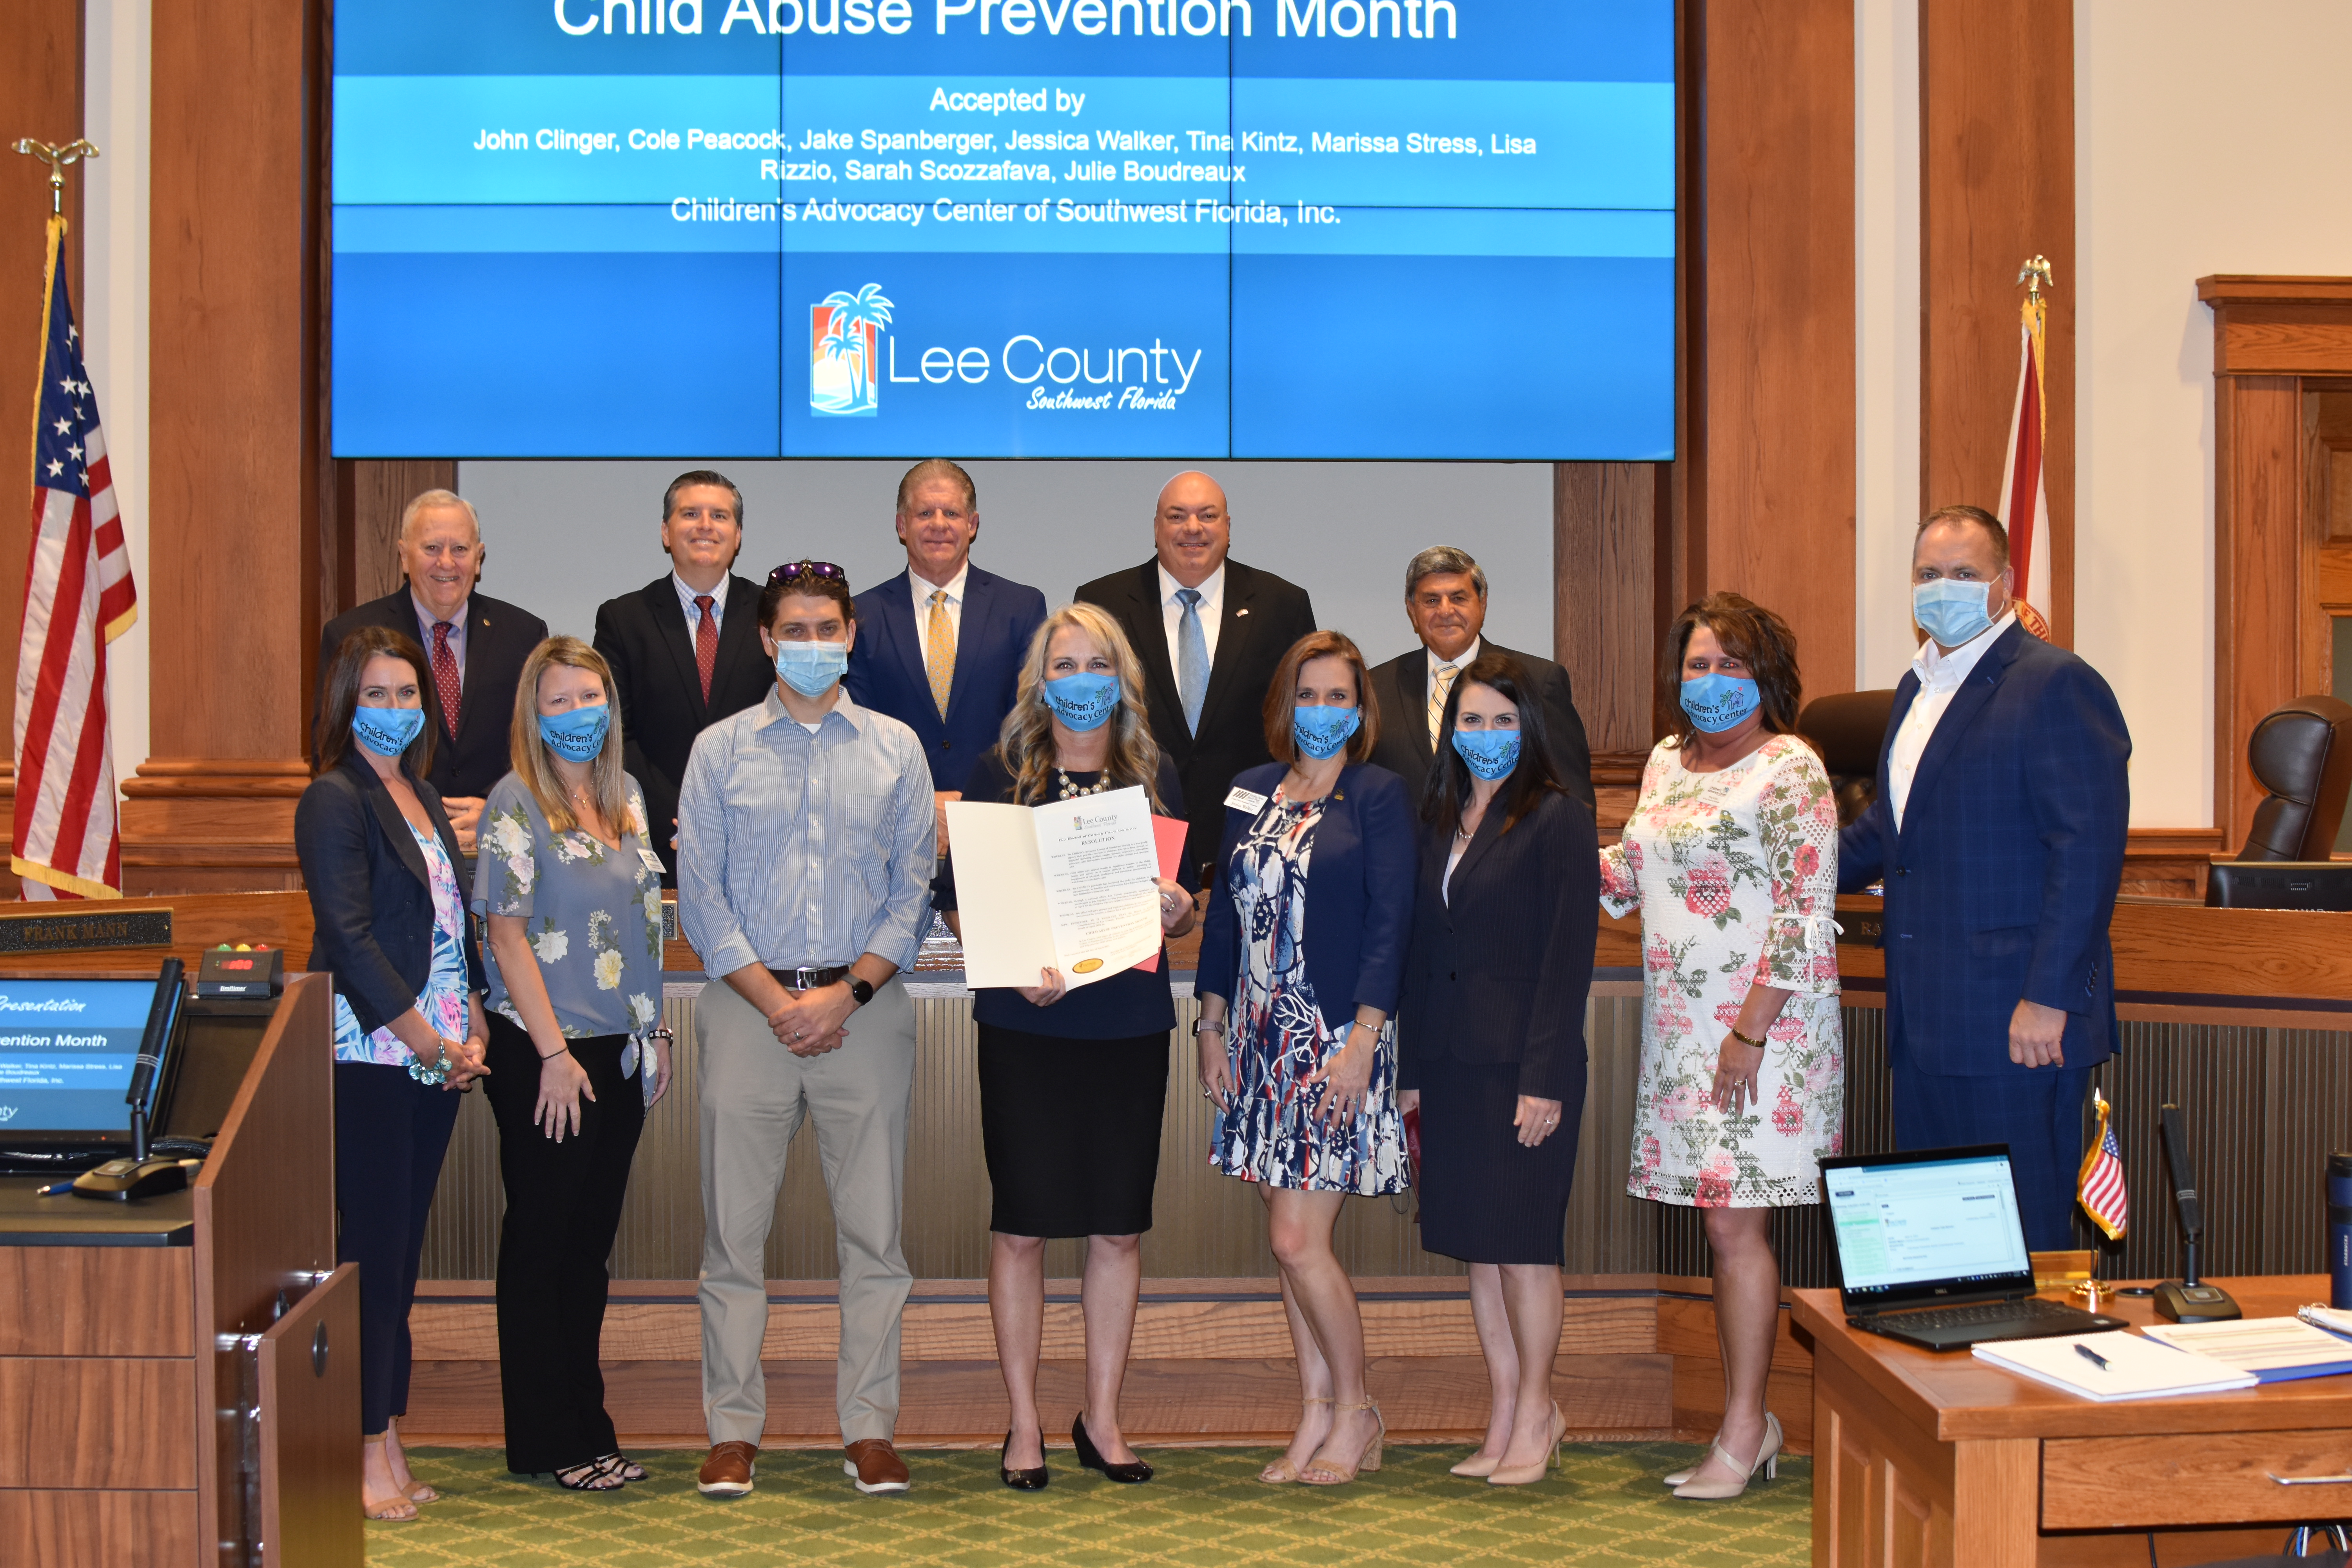 4-6-21 Child Abuse Prevention Month